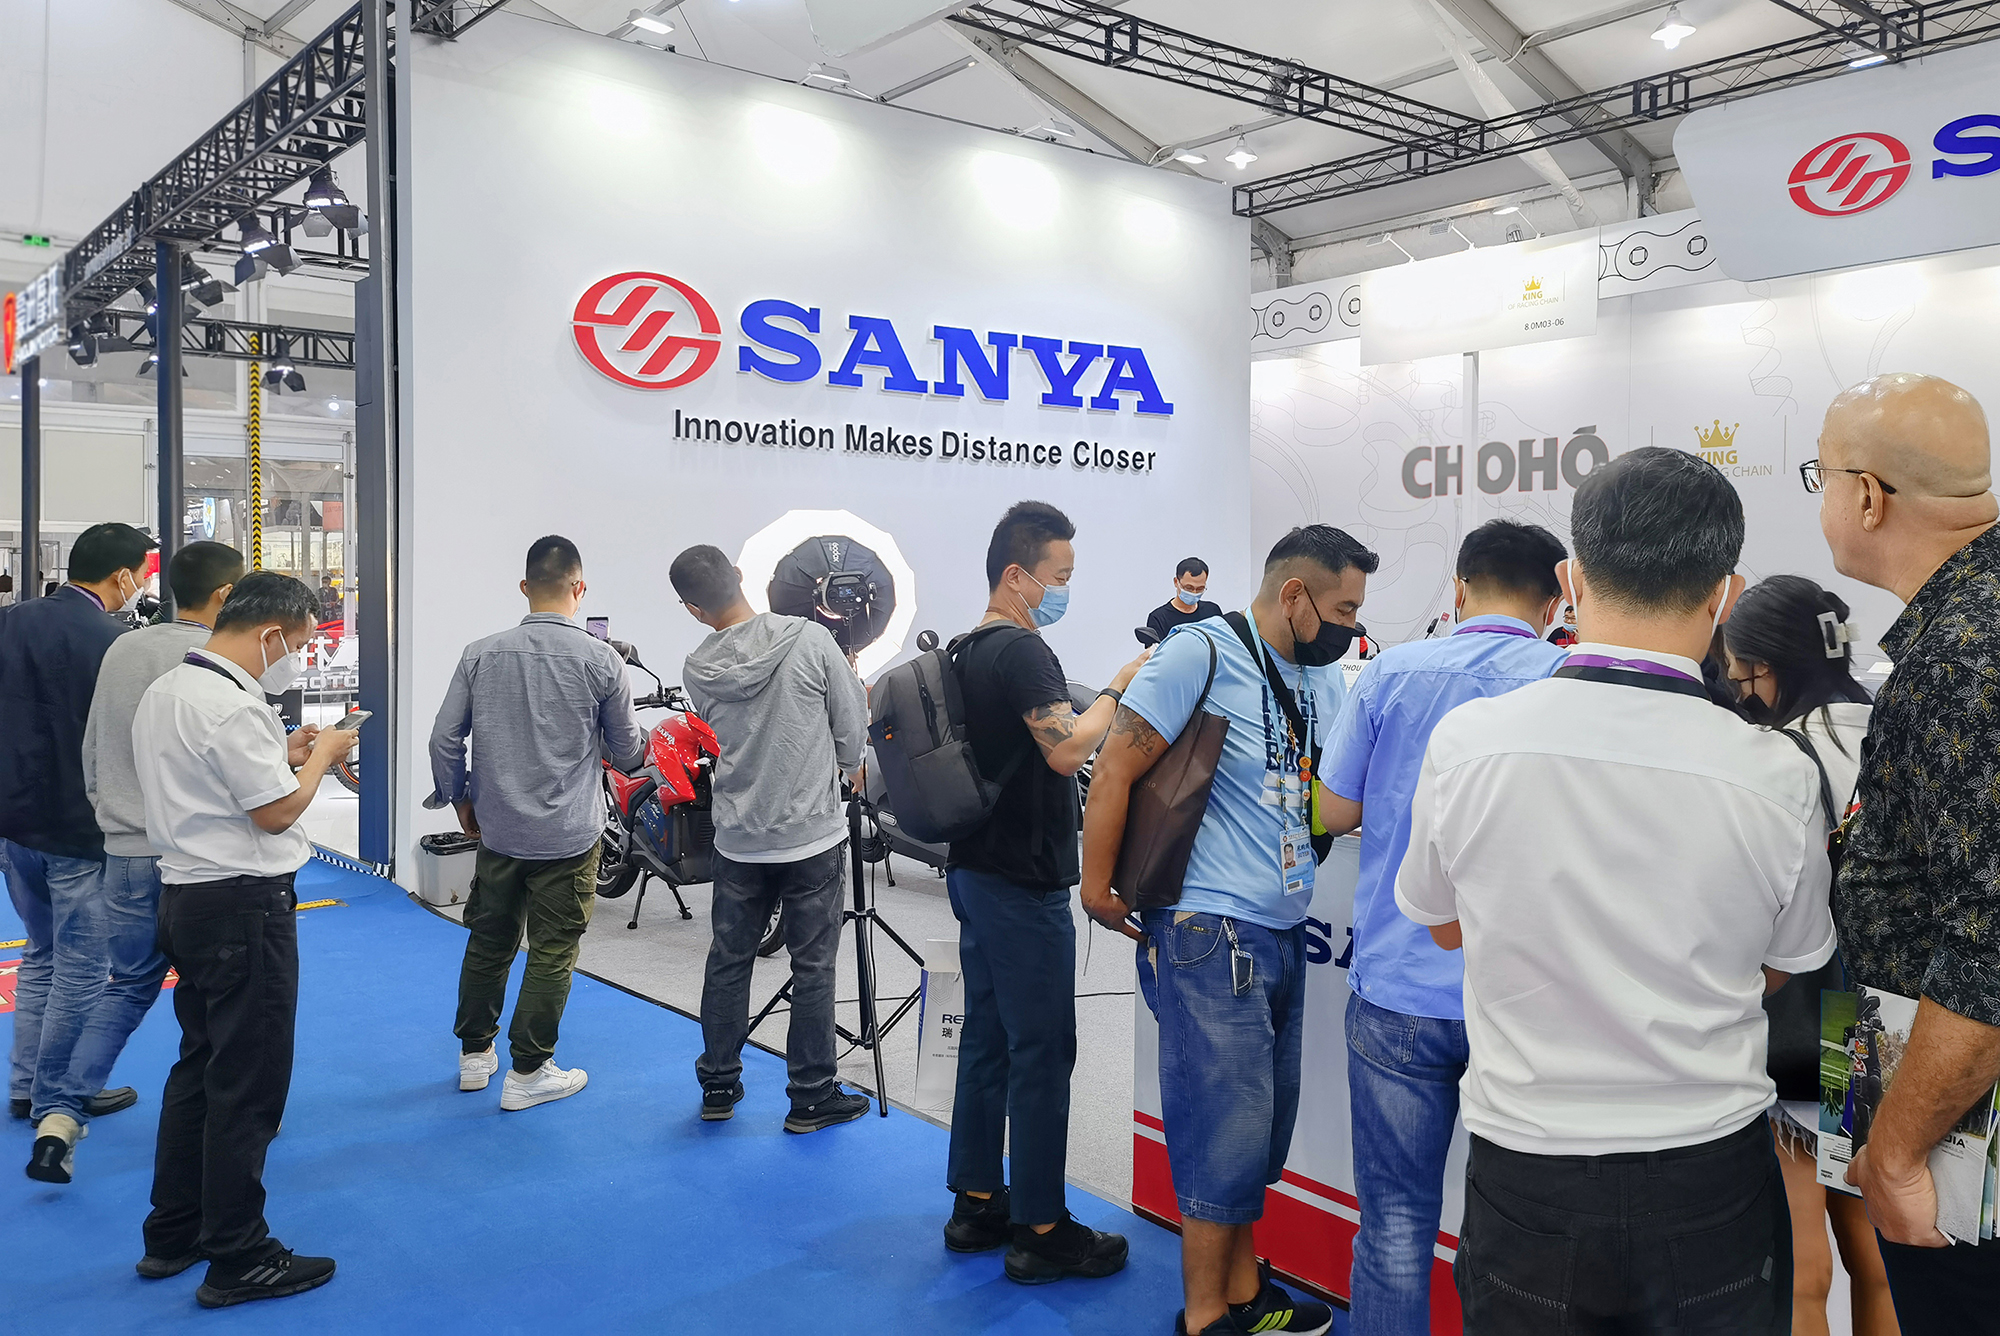 Live online + offline exhibition, the first day of the Canton Fair sanya 